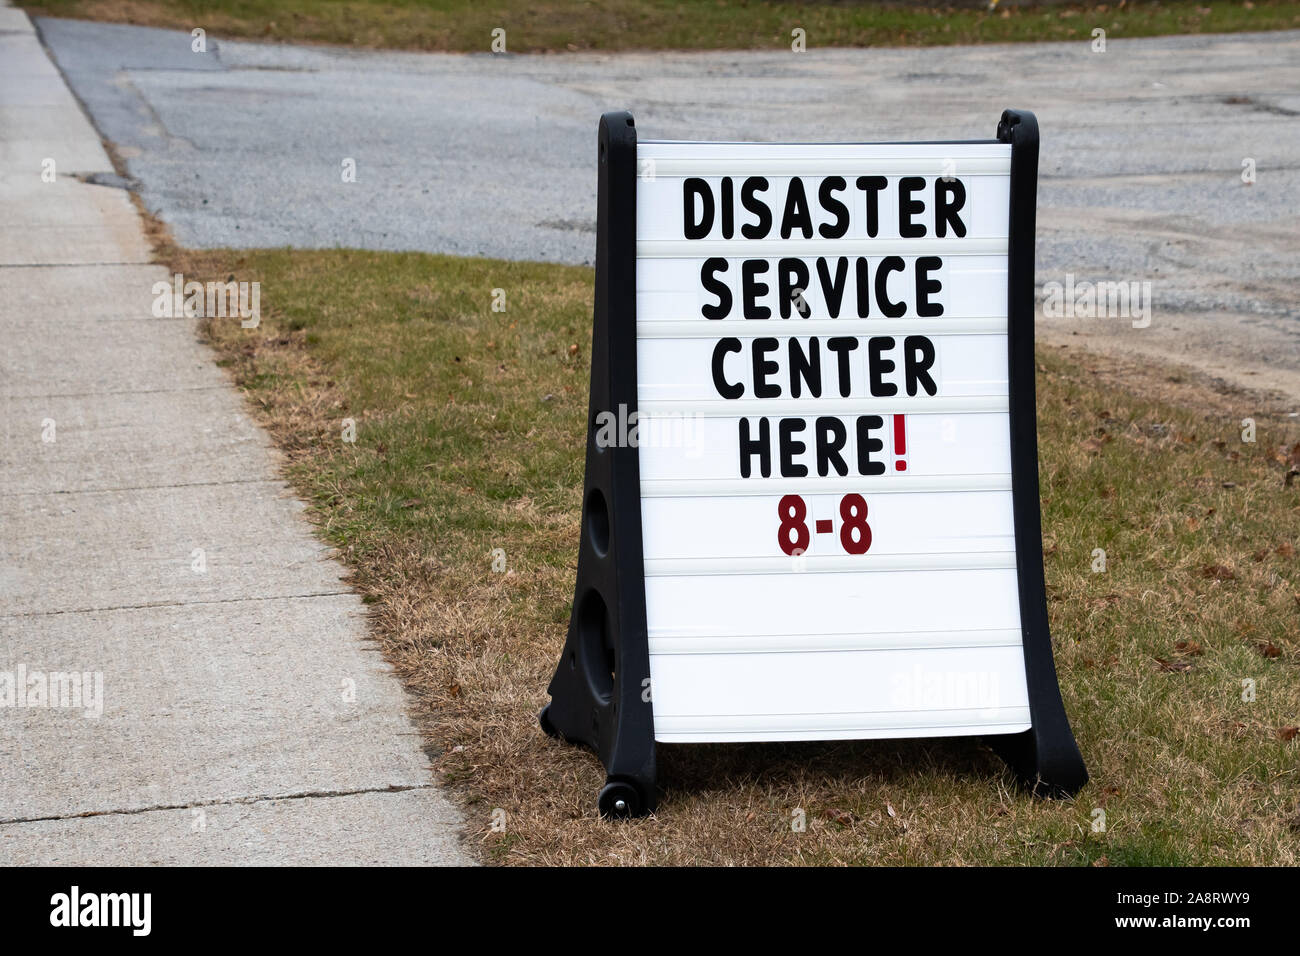 A disaster service center sign in Speculator, NY USA following severe flooding from a major rain storm on Halloween. Stock Photo